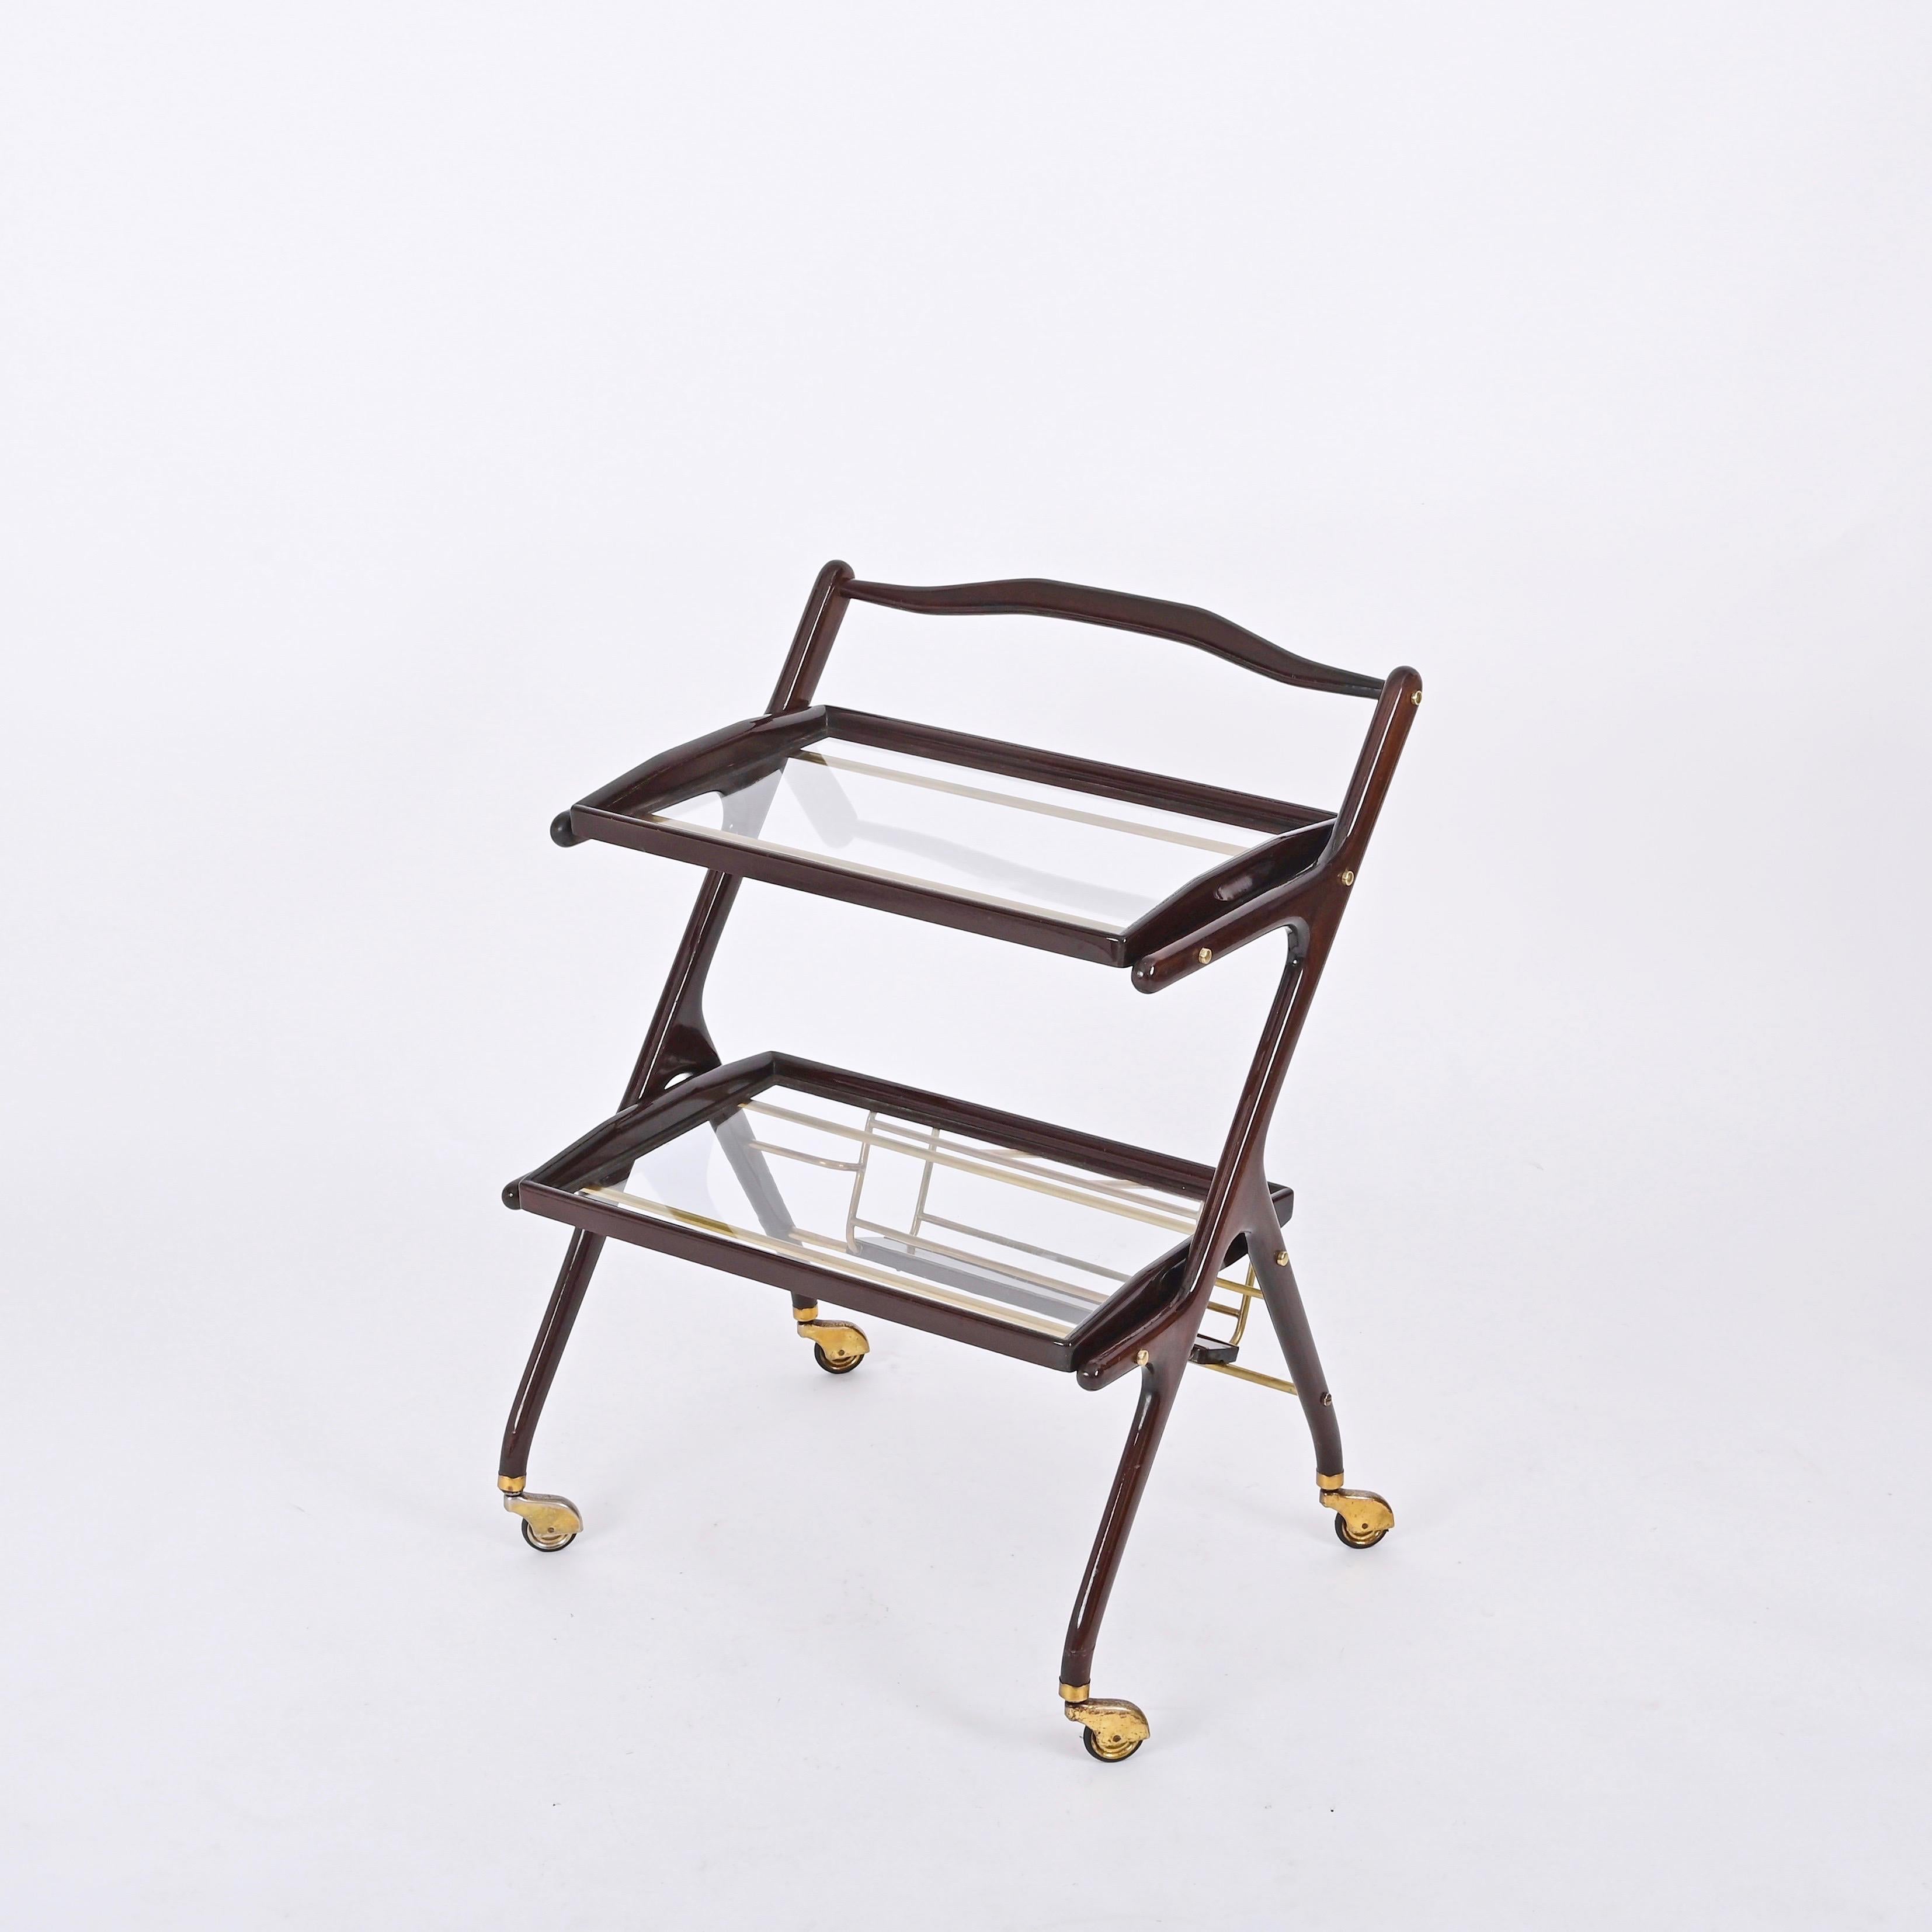 Stunning midcentury bar cart with bottle holder in wood and brass with two removable trays in crystal glass and wood. This fantastic piece was designed by Cesare Lacca in Italy during 1950s.

This structure of this serving table is fully made in a